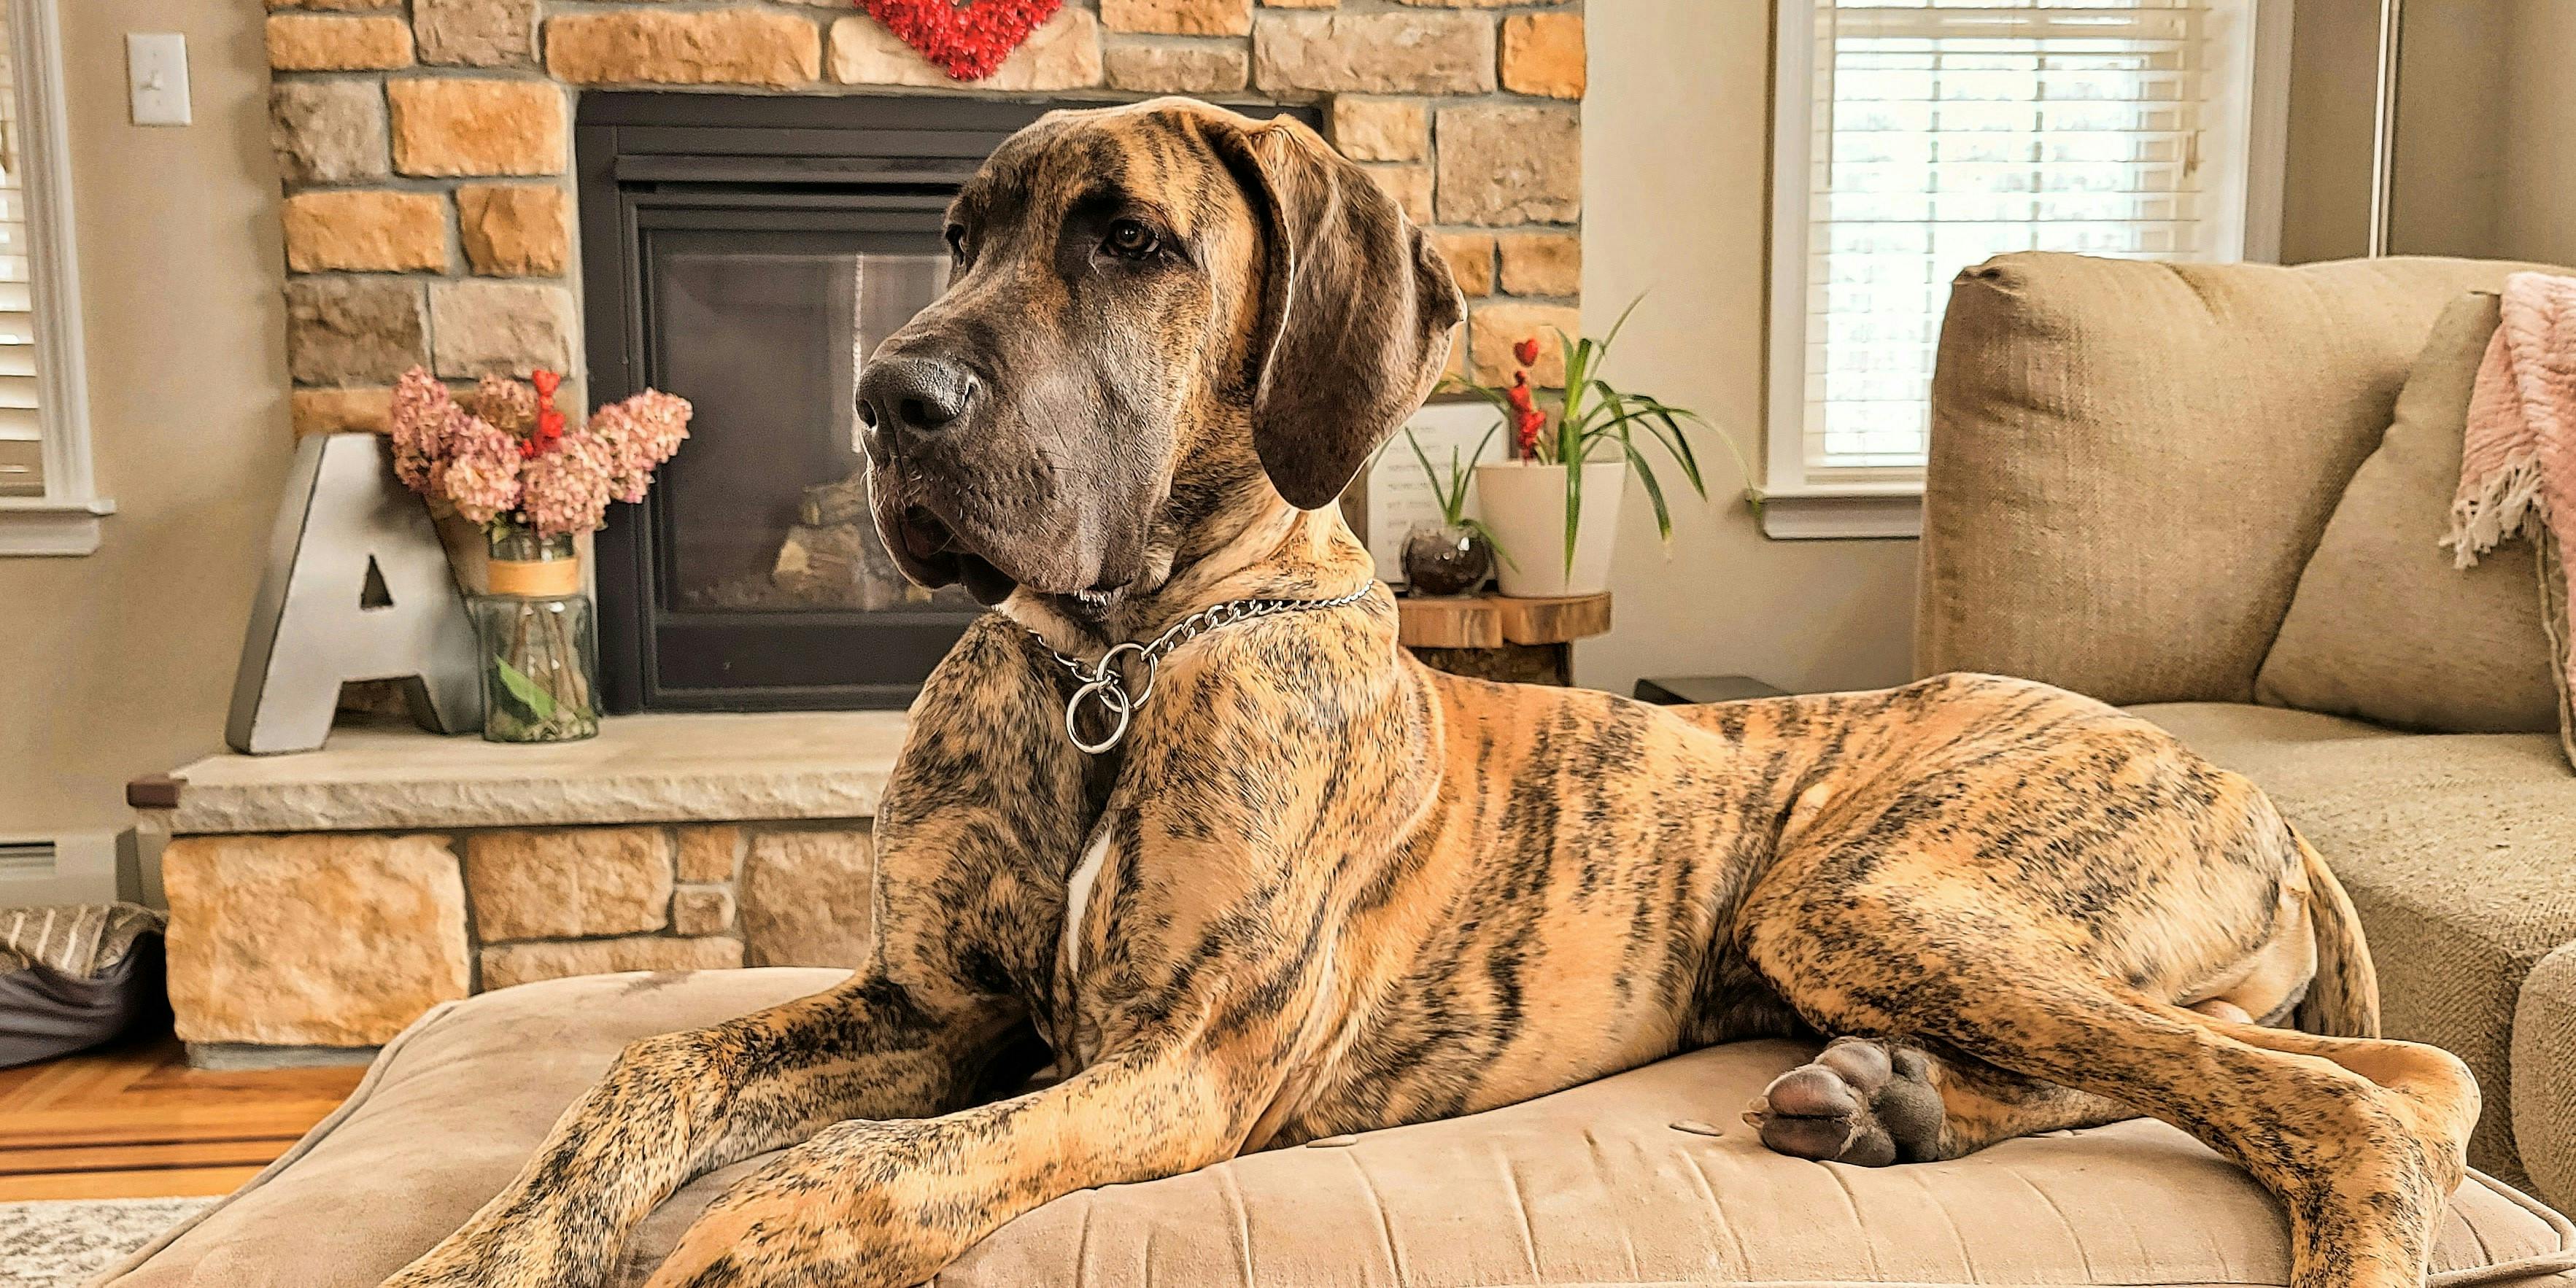 Is Great Dane a Good Family Dog?